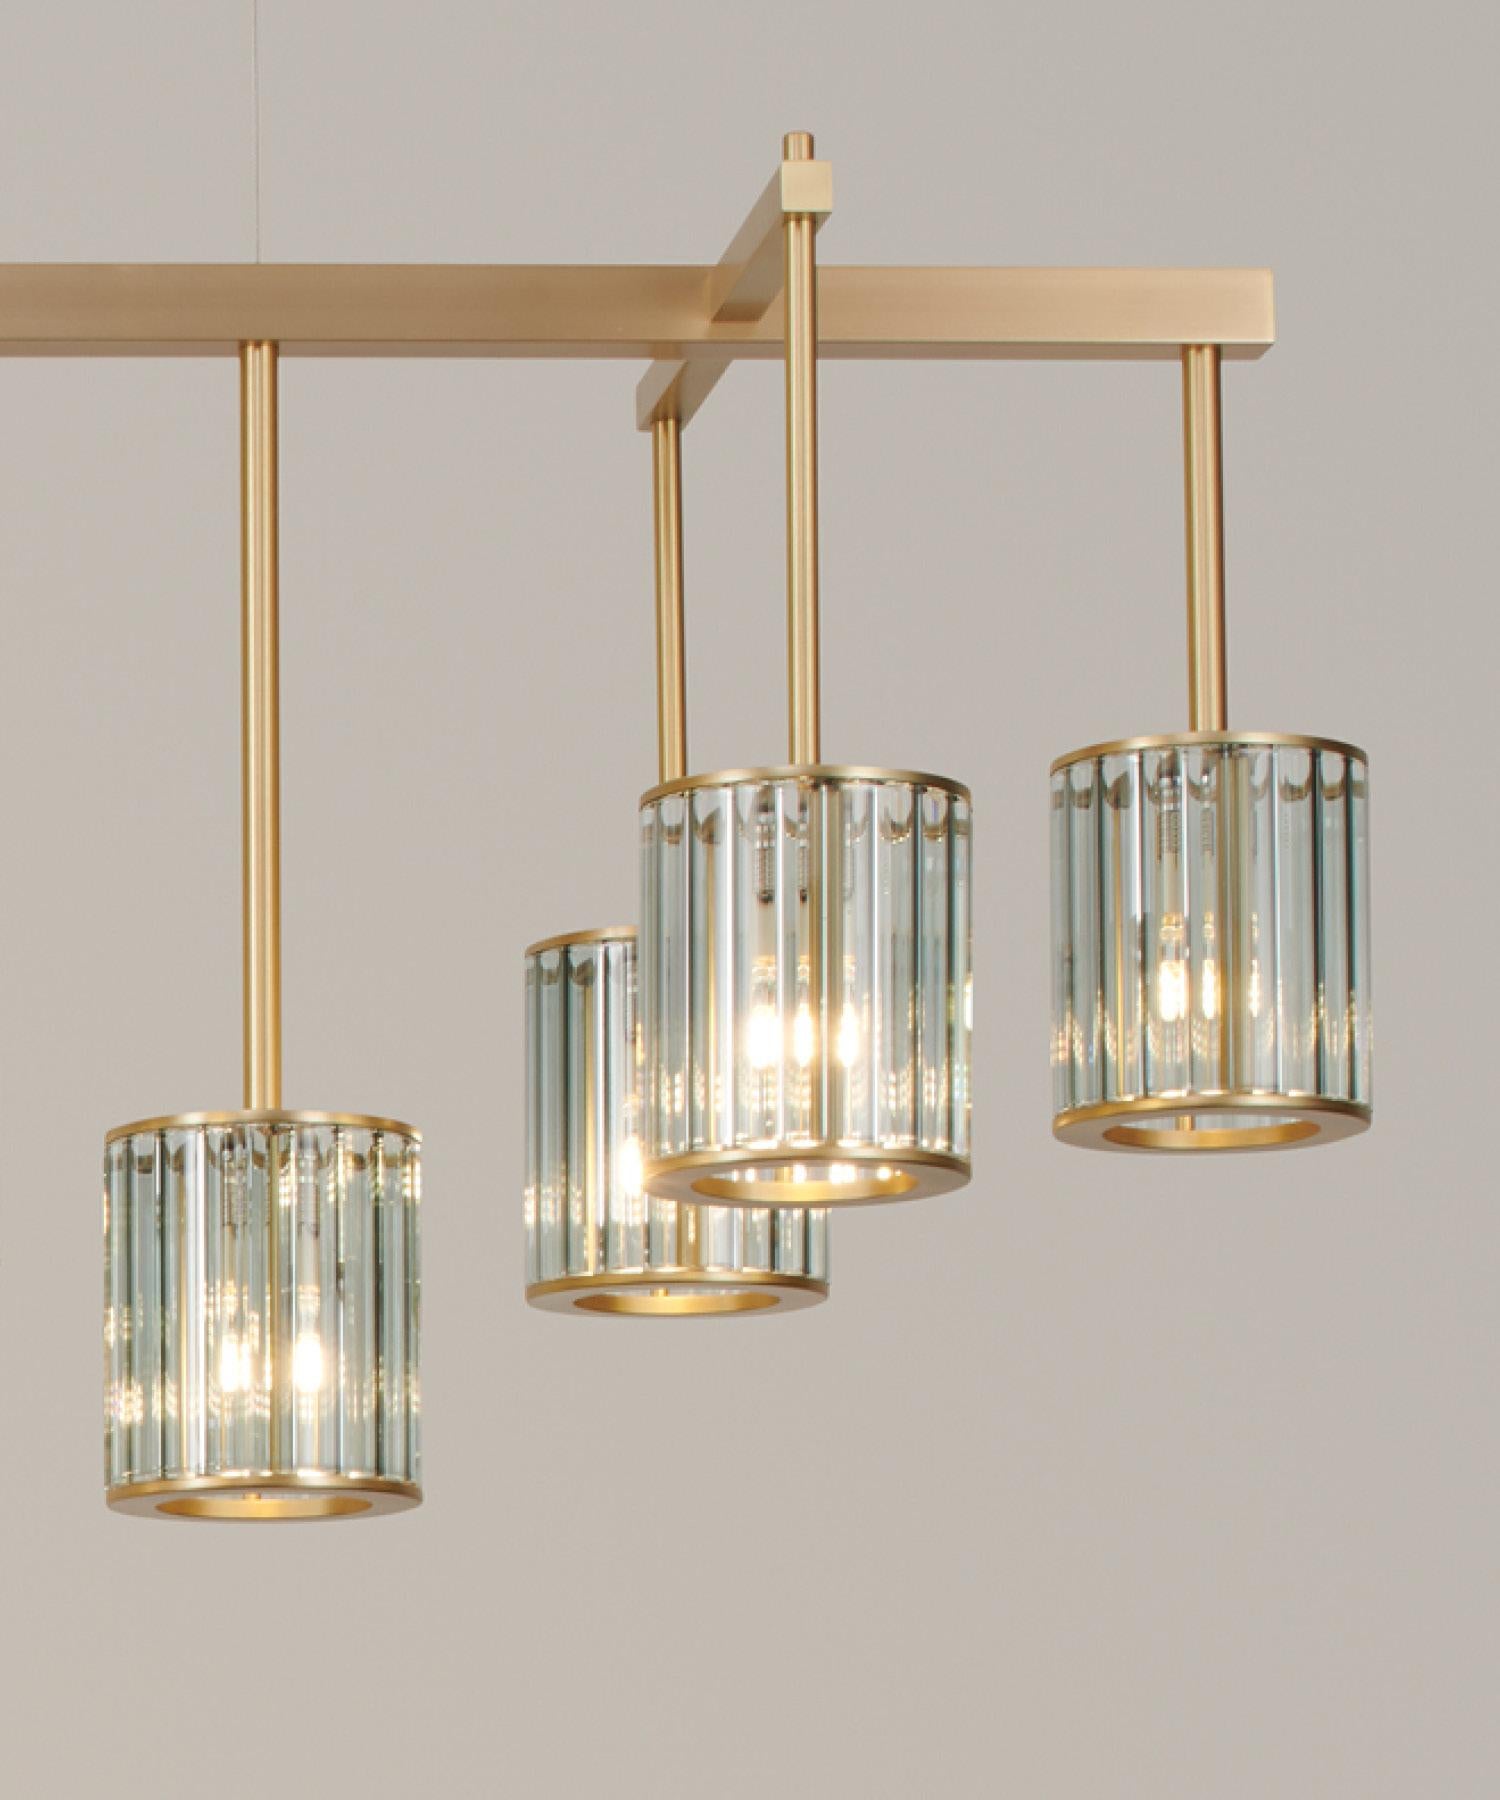 Flute Beam Chandelier with 13 Arms in Brushed Brass and Frosted Glass Diffusers For Sale 5